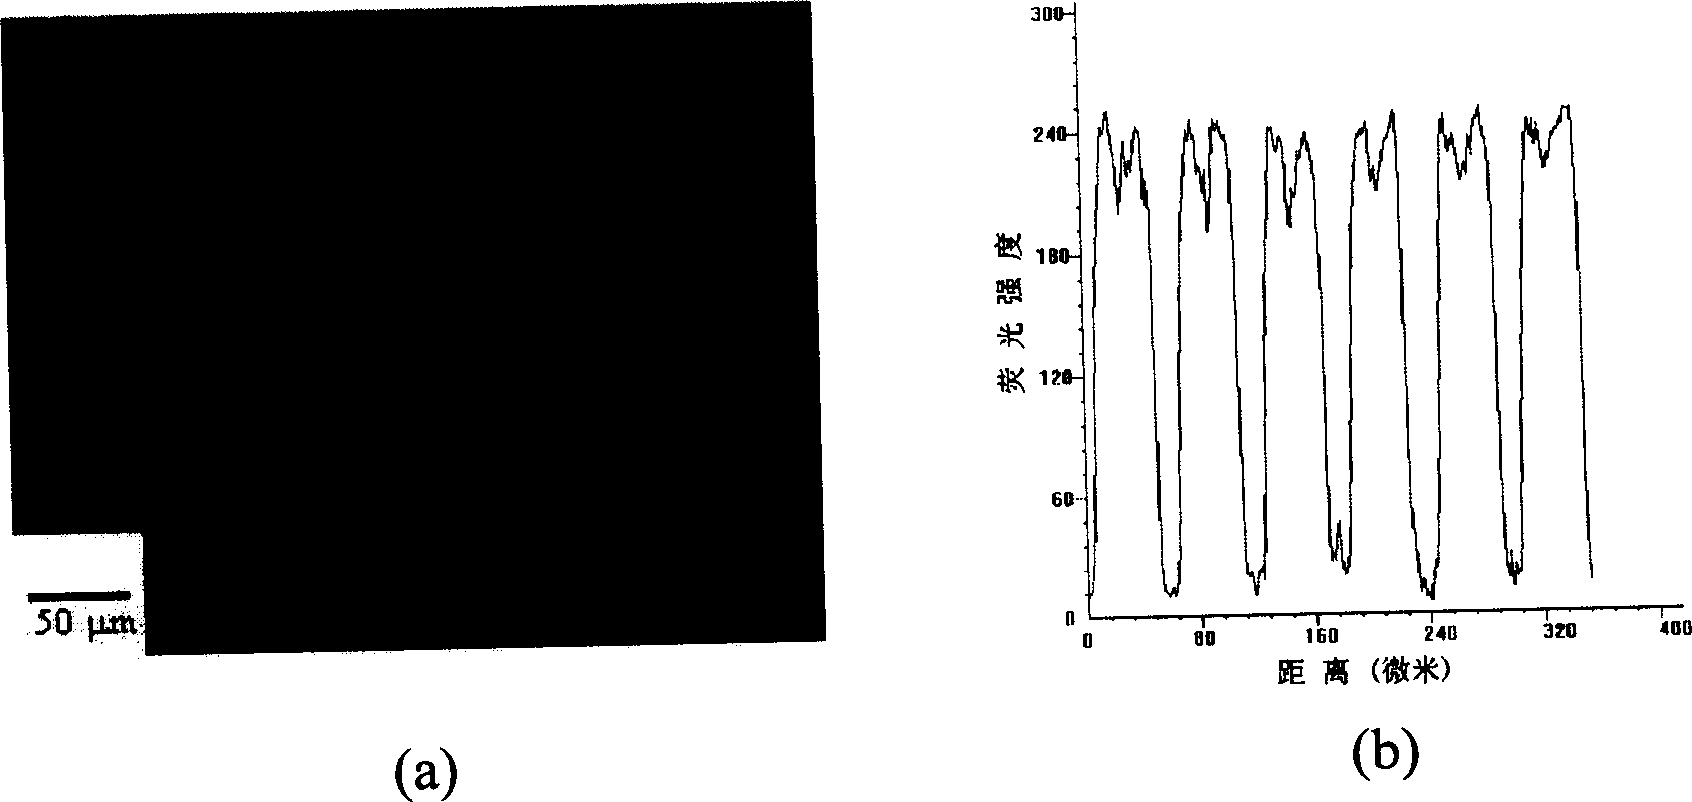 Method for fixing biological macro molecule pattern on polymer active surface by micro transfer technology